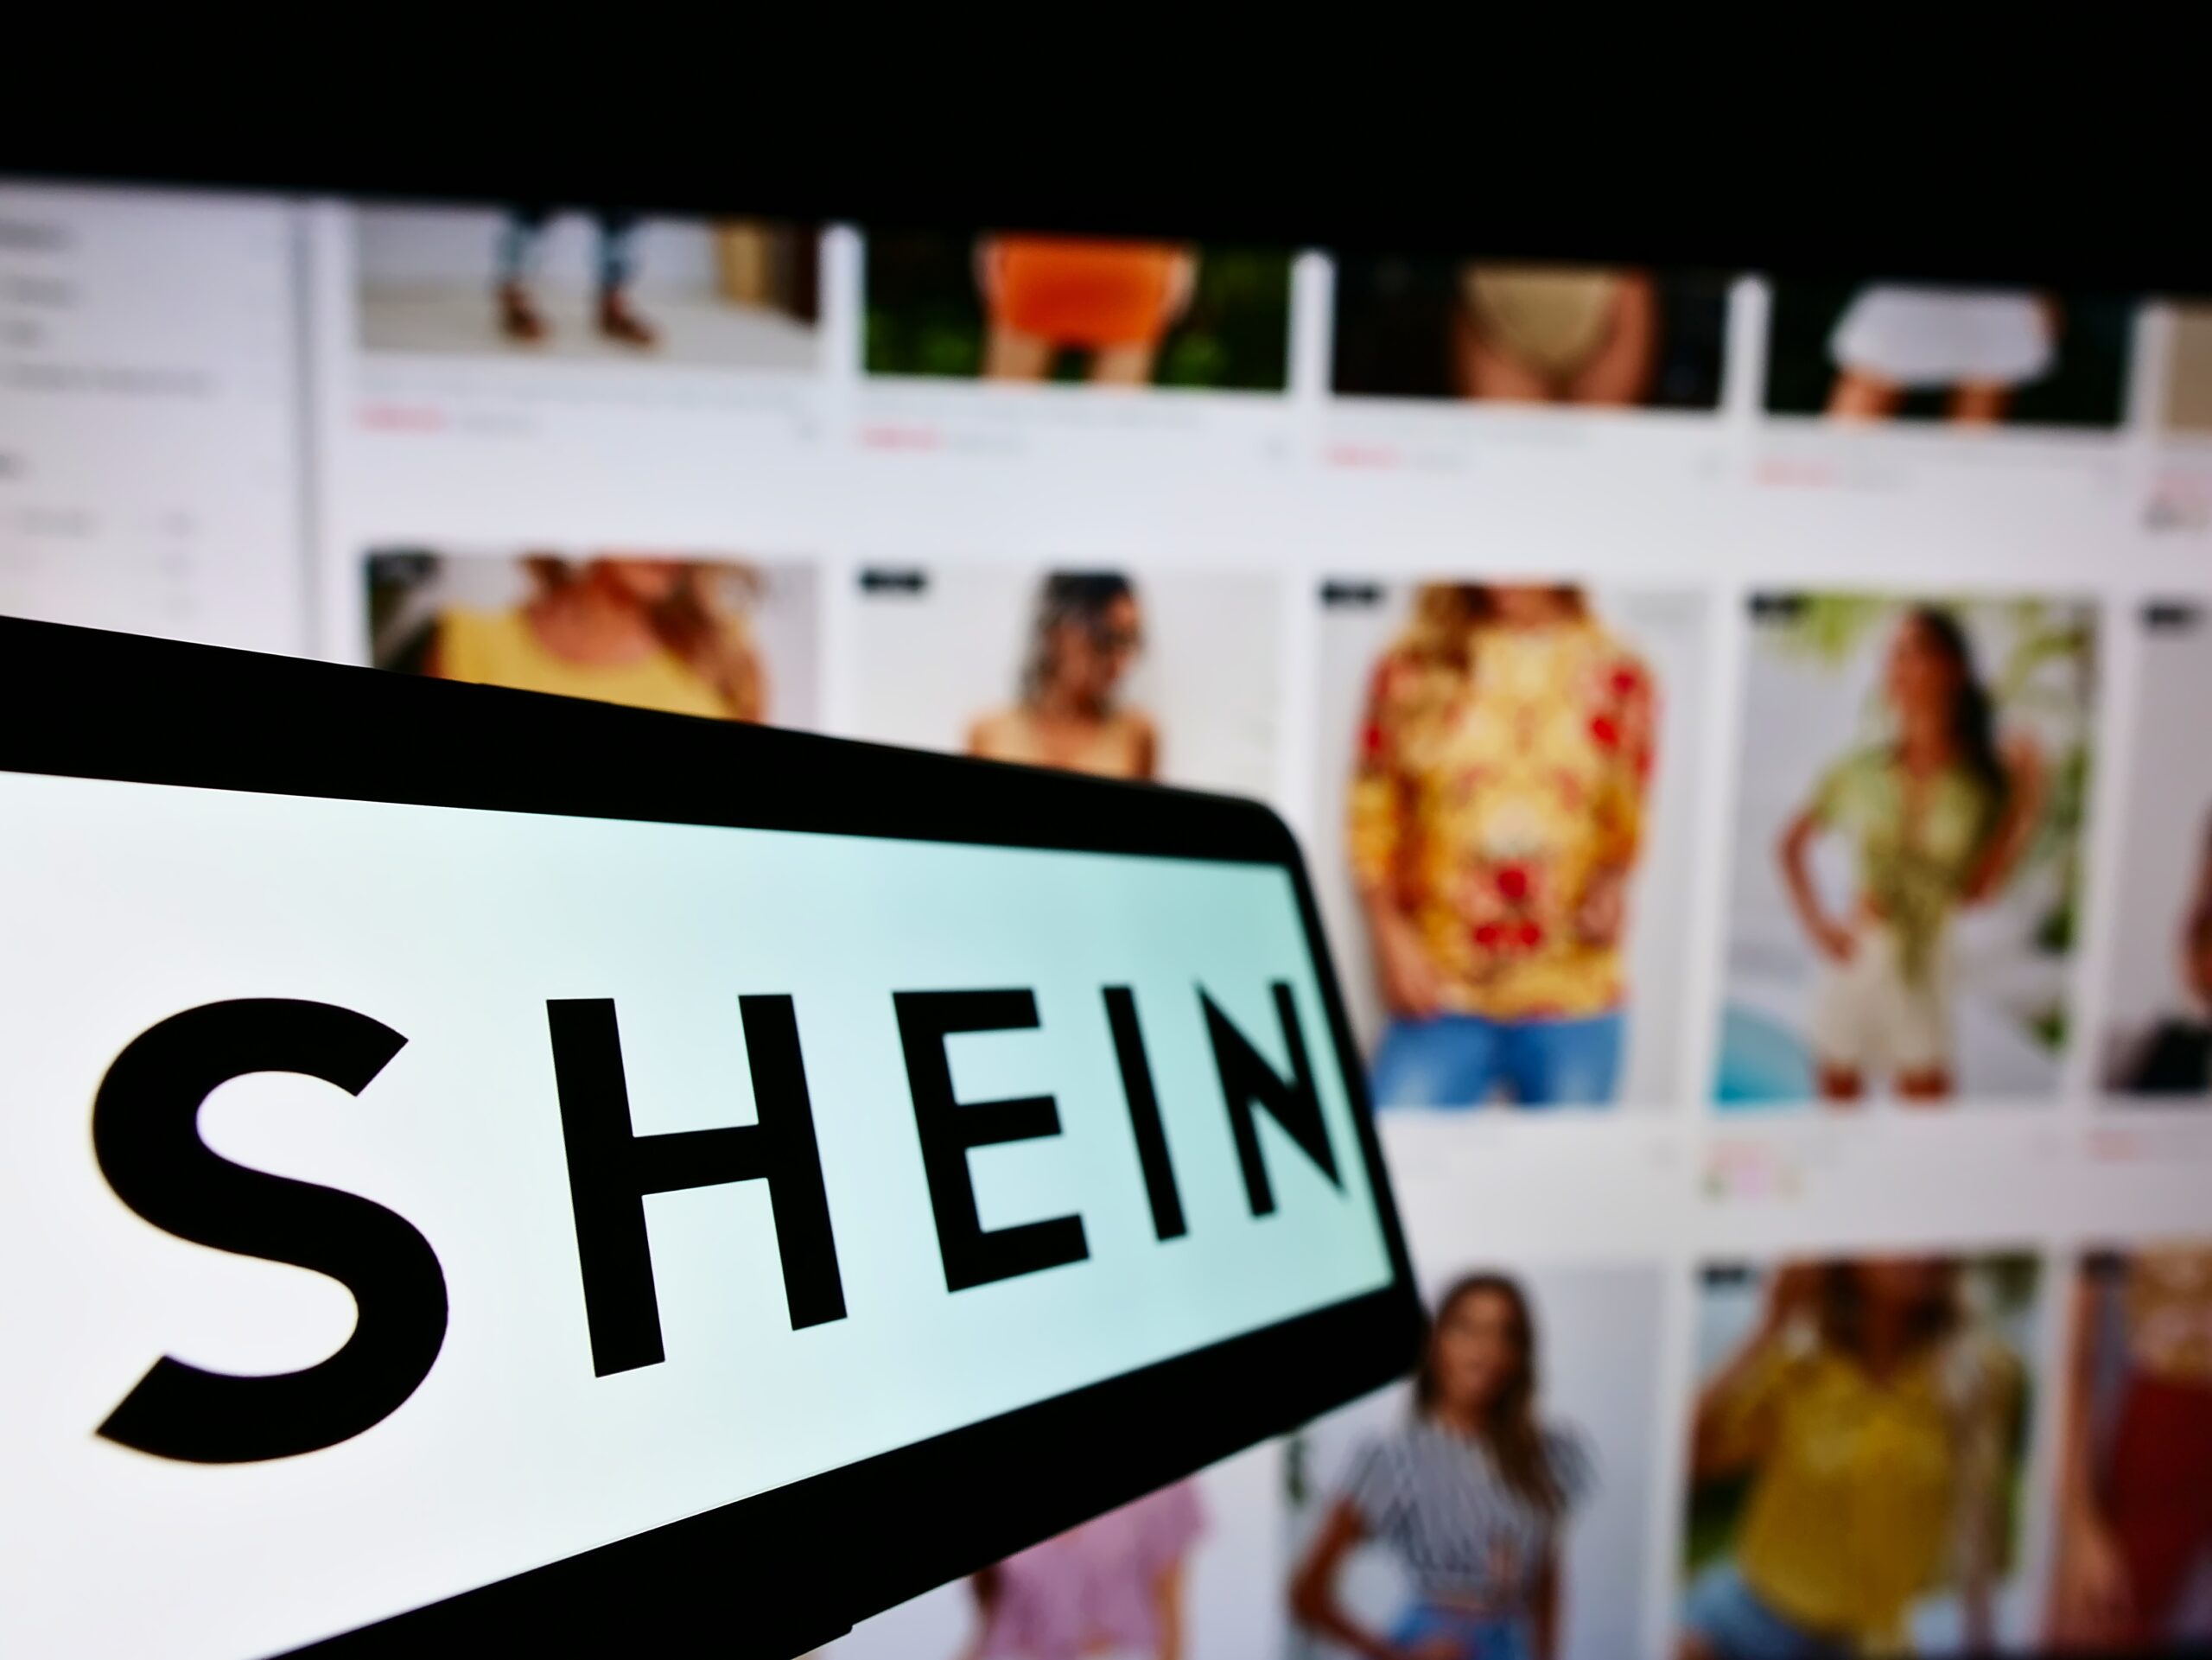 Shein’s Return Policy: Get A Refund For Items That Don’t Fit!